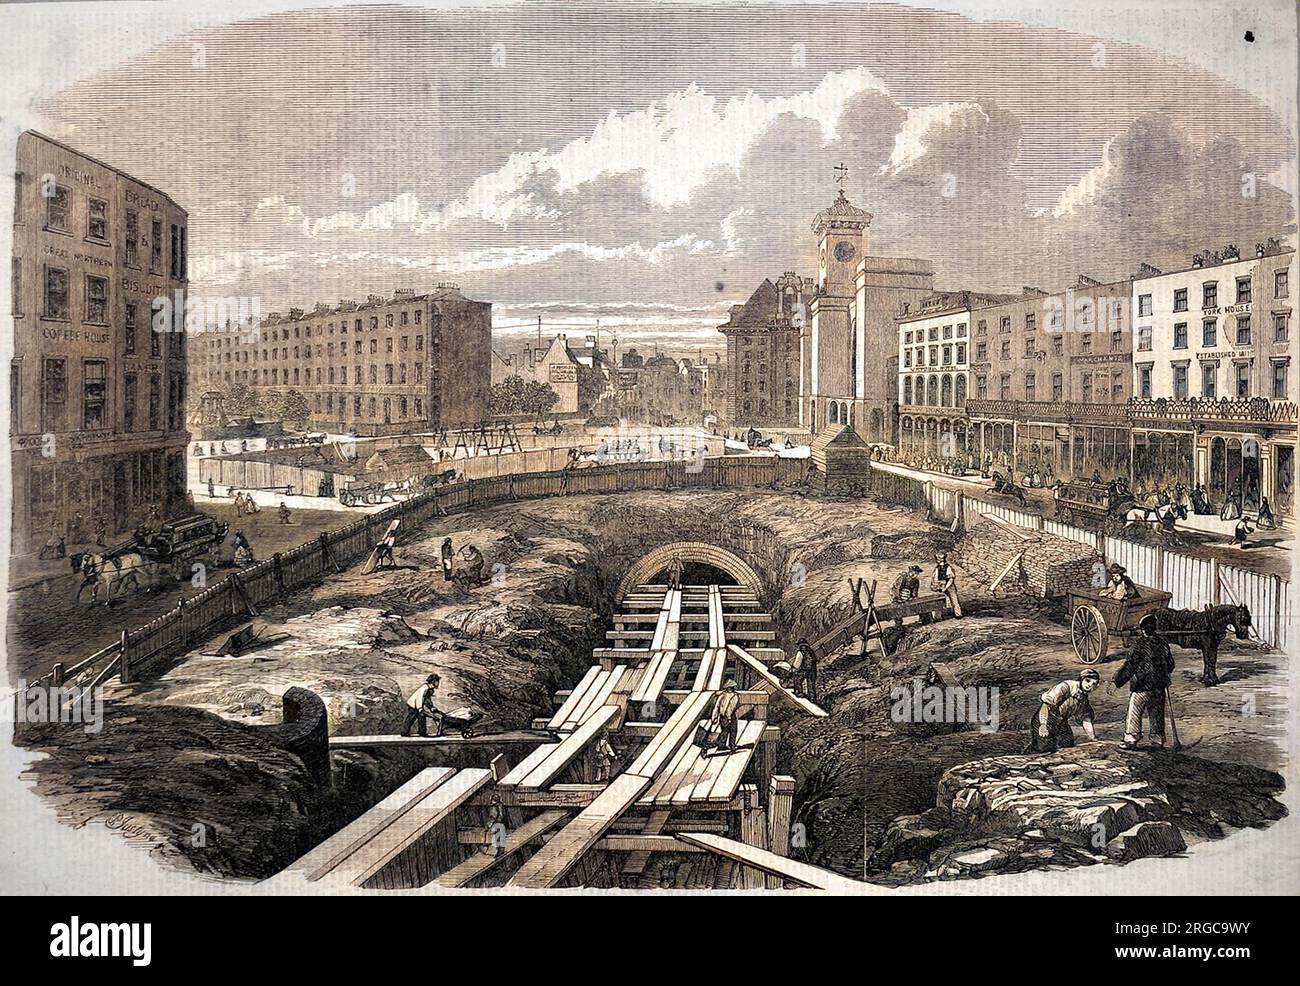 The building work in progress at King's Cross, to host part of the Mertropolitan underground railway. The first section of the underground was completed in 1863, soon to be followed by a extension to Westminster. Both broad gauge and standard gauge track were used. Stock Photo